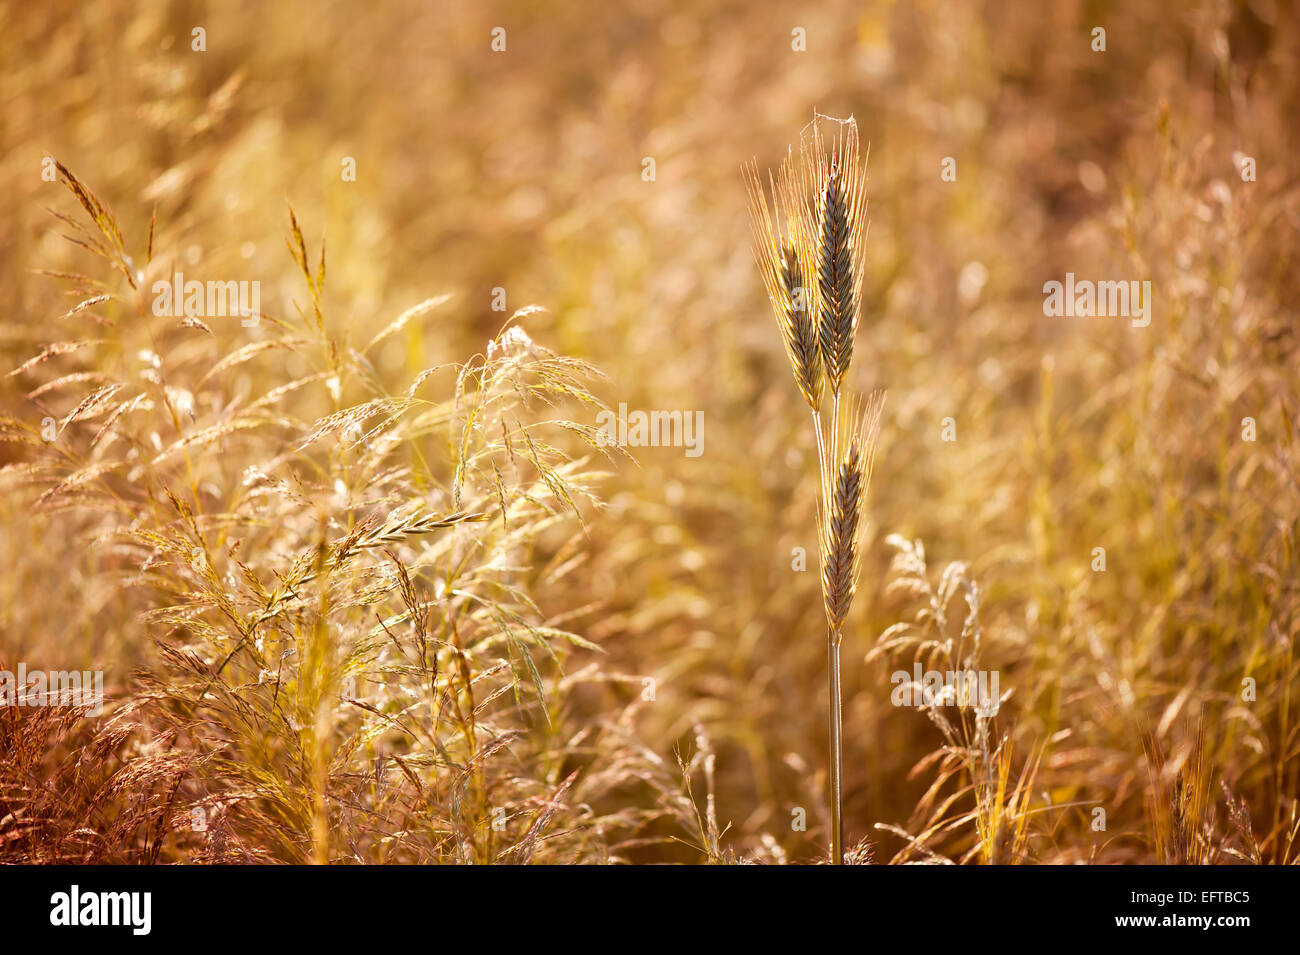 Golden cereal plant photo Stock Photo